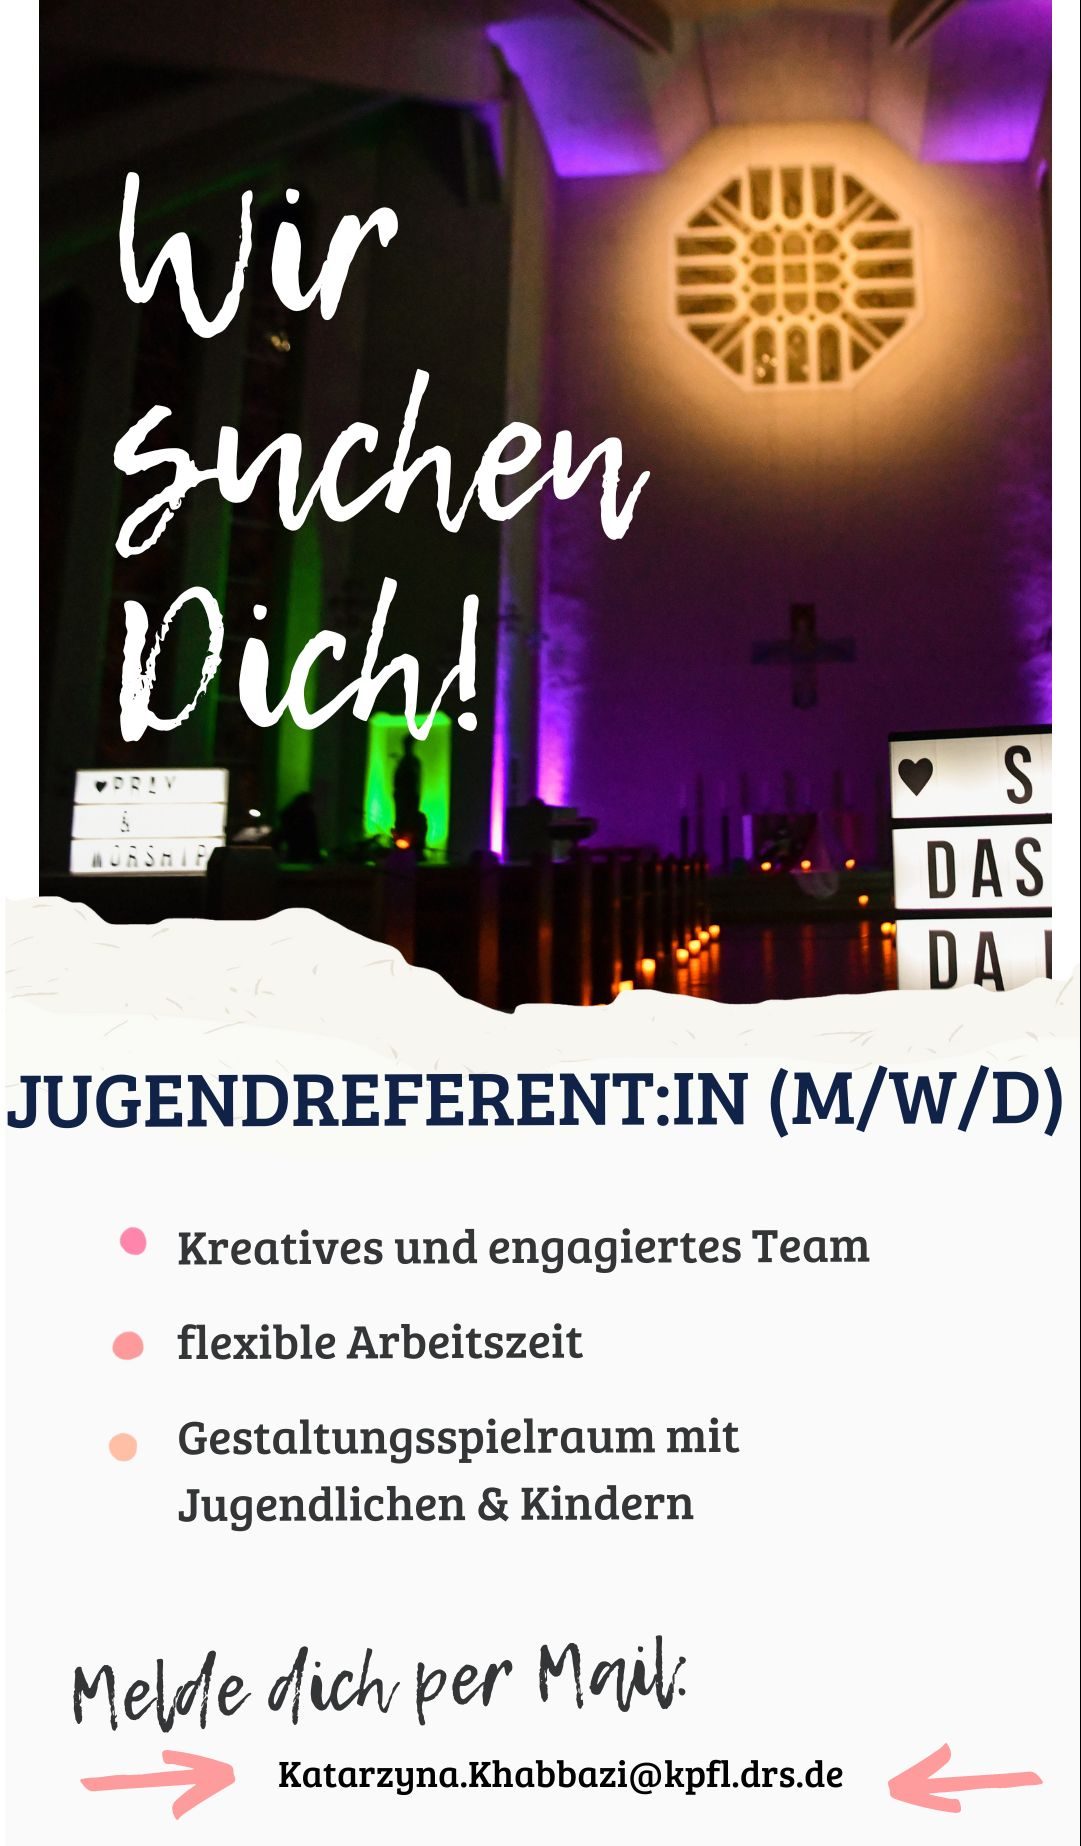 Wir suchen Dich! – Jugendreferent:in (m,w,d)